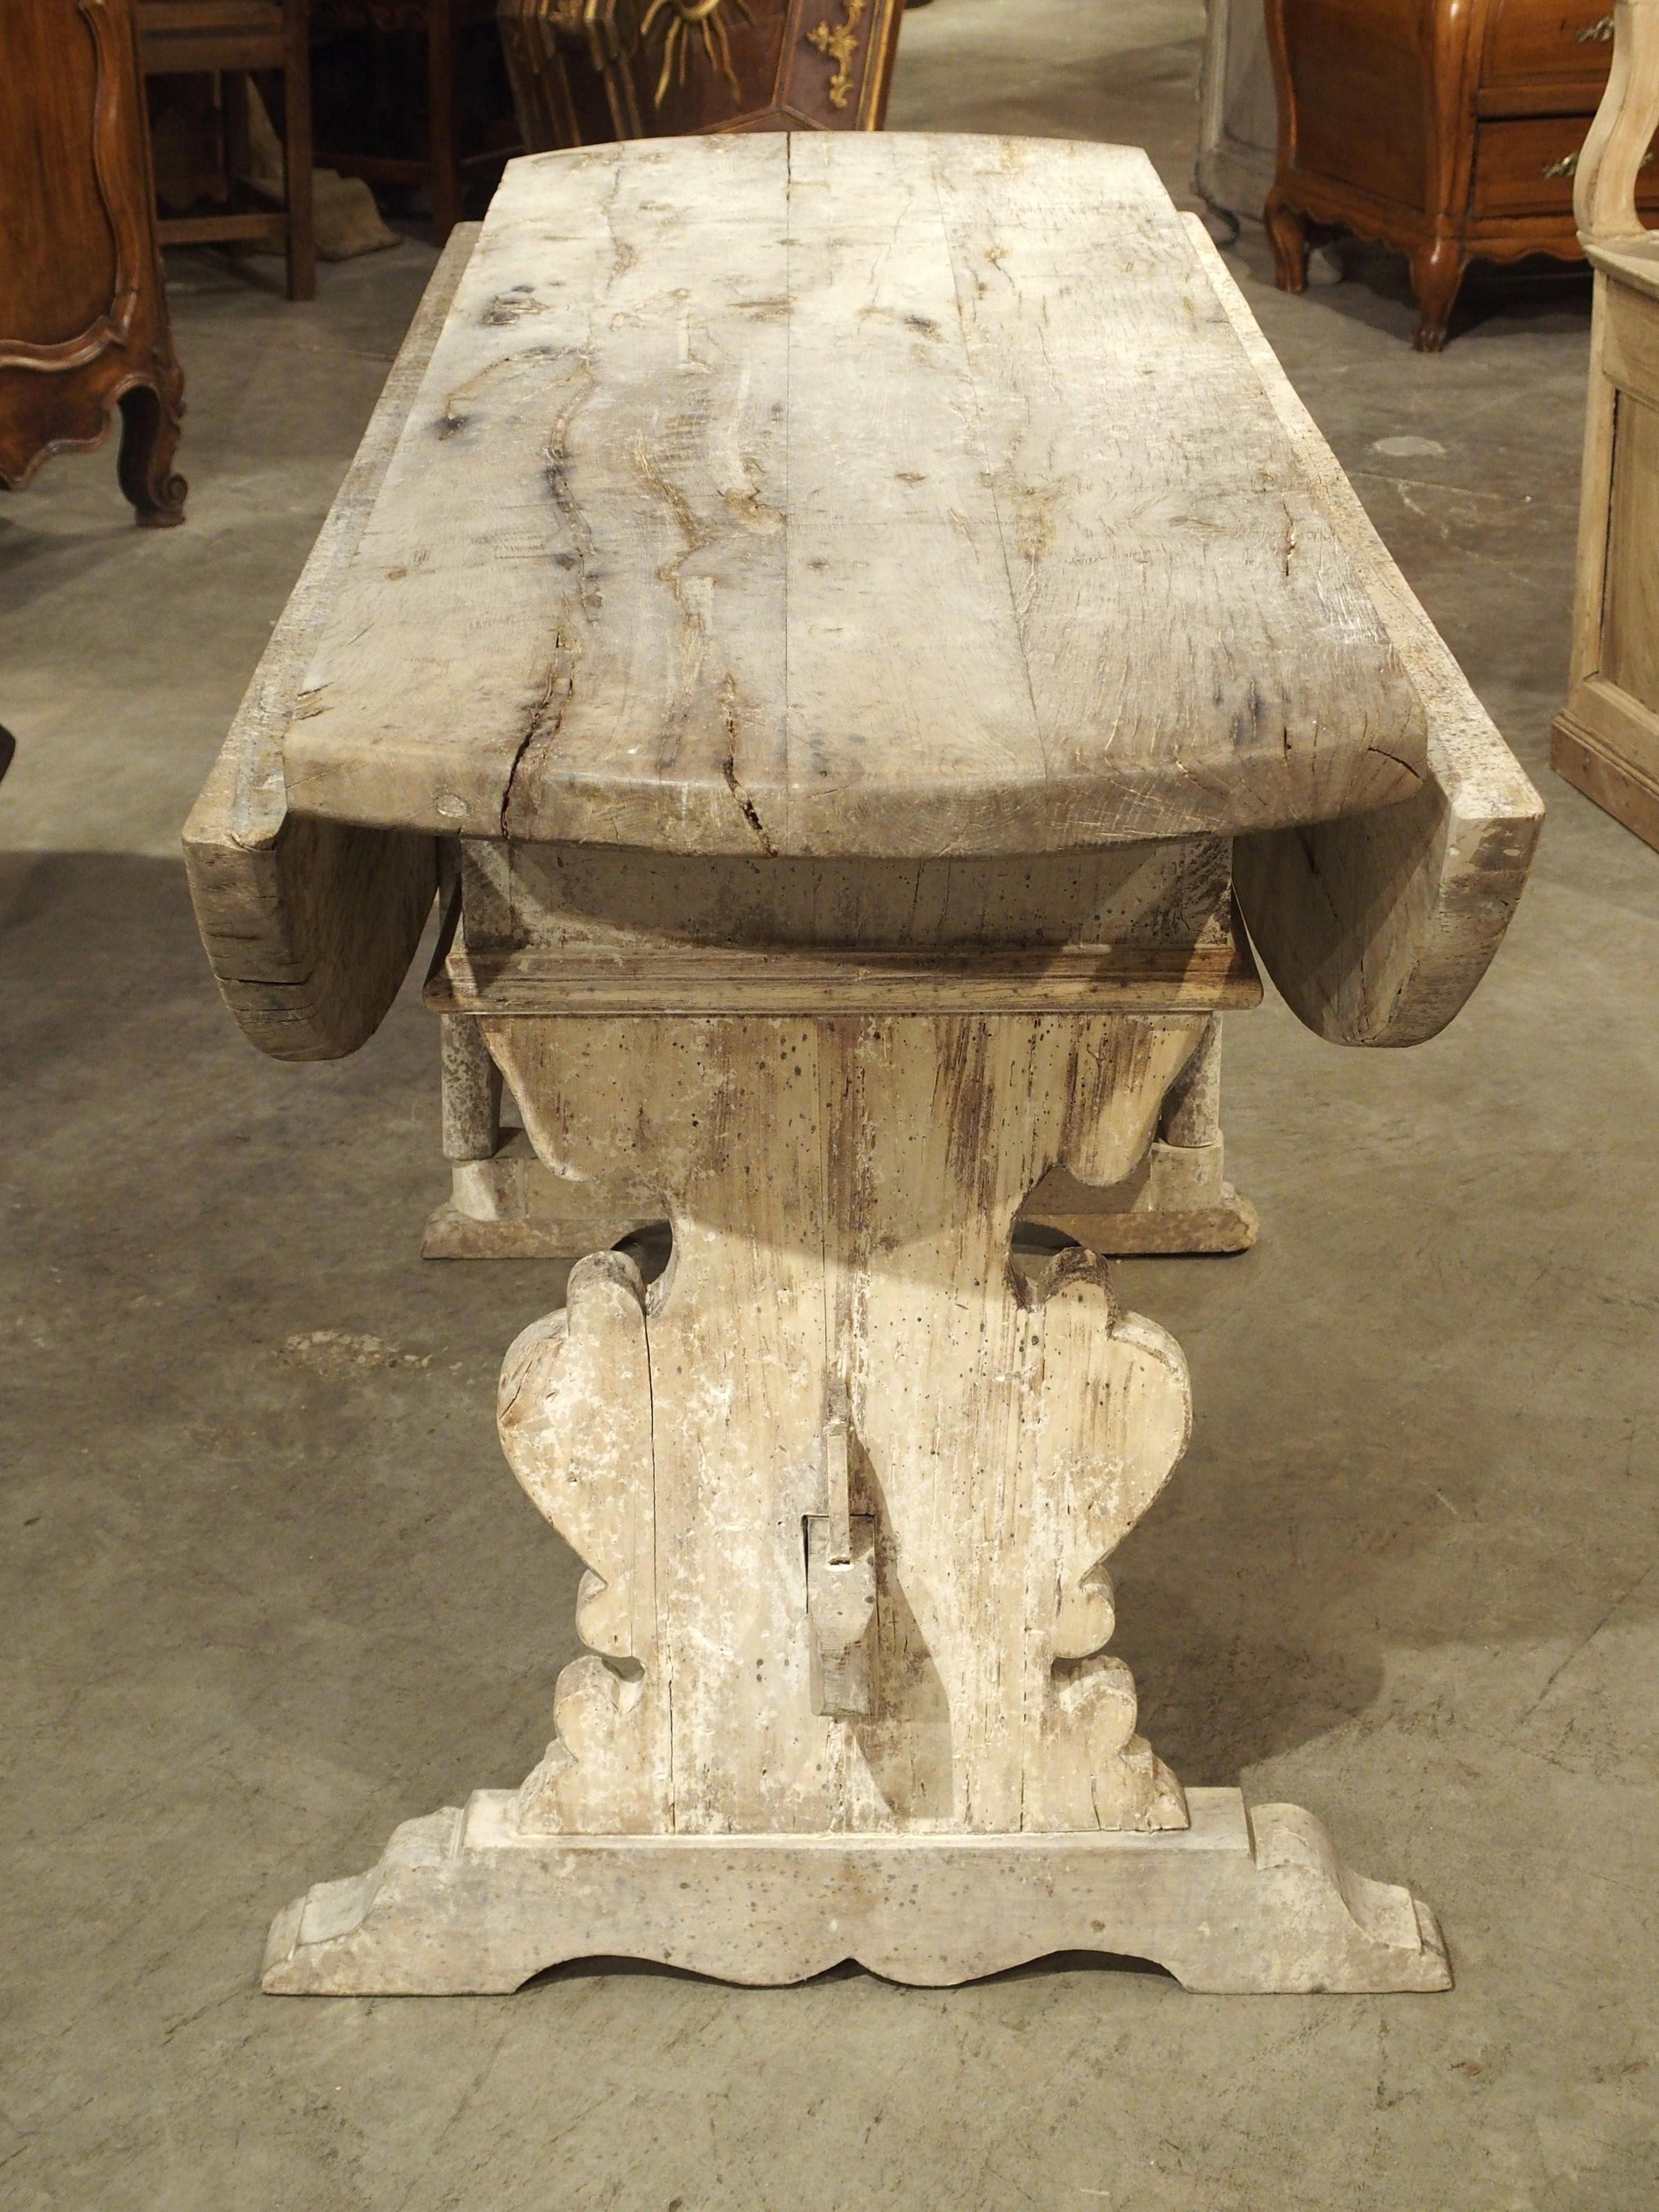 A wonderful and unique piece of furnishing from Italy, this oval drop-leaf table was hand-carved in the 1600s. The oak wood has since been whitewashed, giving the wood a white-gray hue with accents of cream, all while allowing some of the darker,